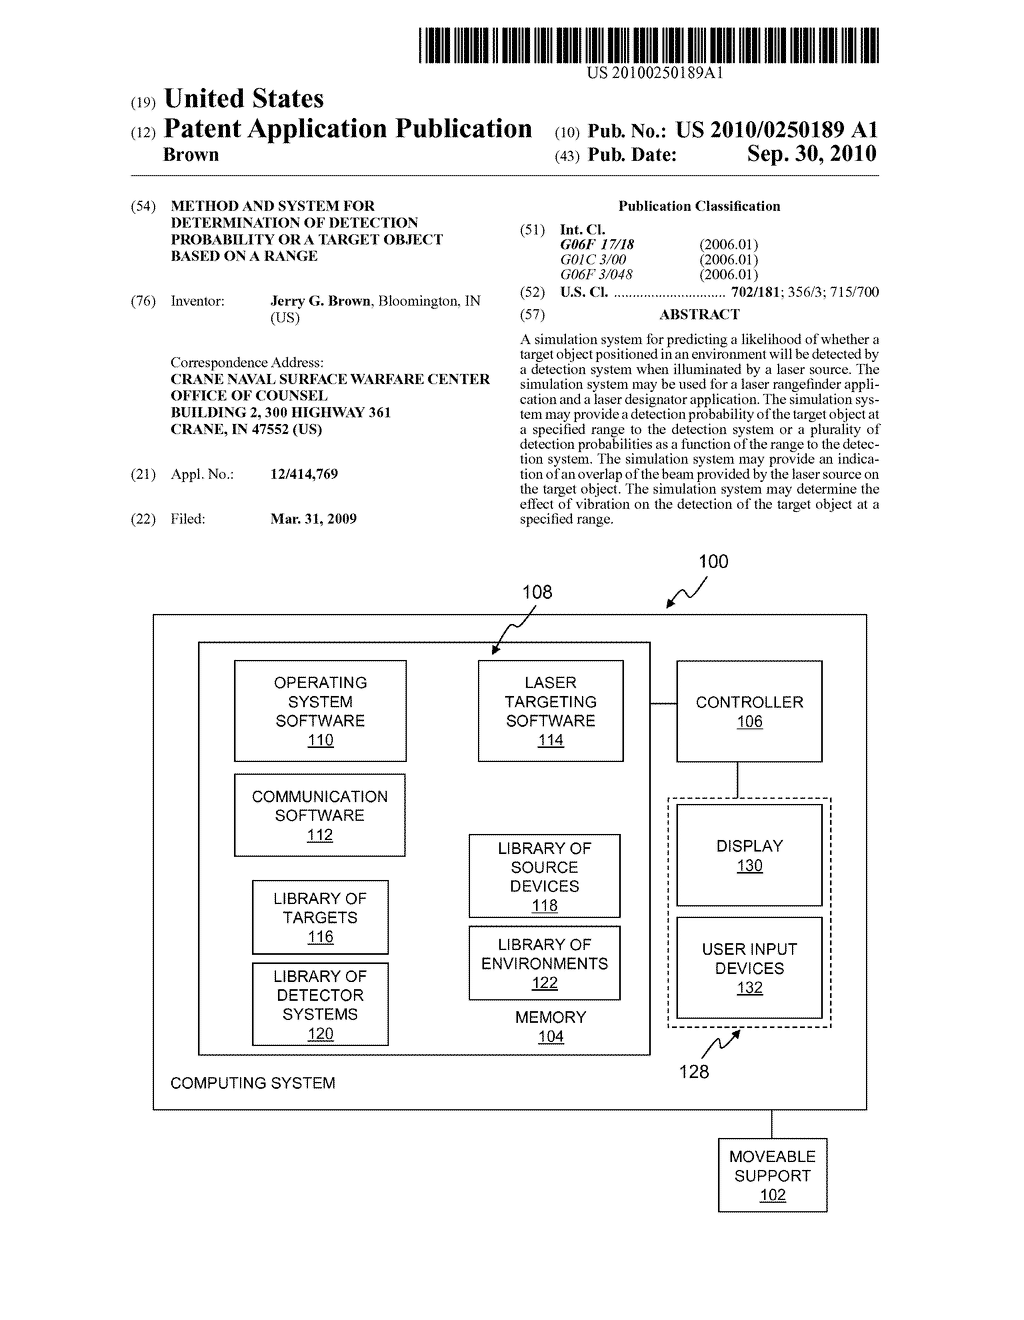 Method and System for Determination of Detection Probability or a Target Object Based on a Range - diagram, schematic, and image 01